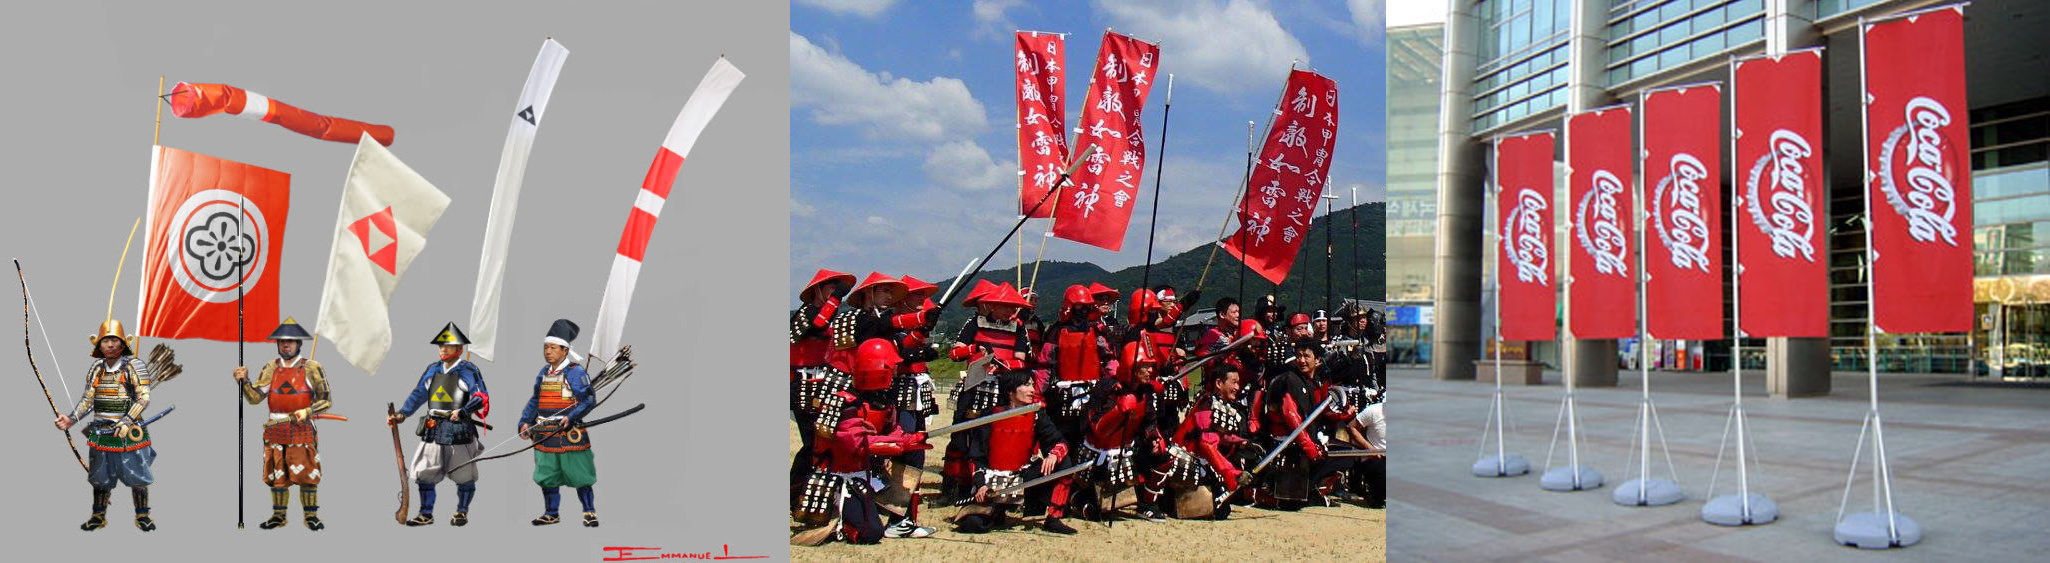 Various nobori as carried by Edo-period samurai (left) | Nobori used during historic re-enactment (center) | Modern uses for nobori banners (right)